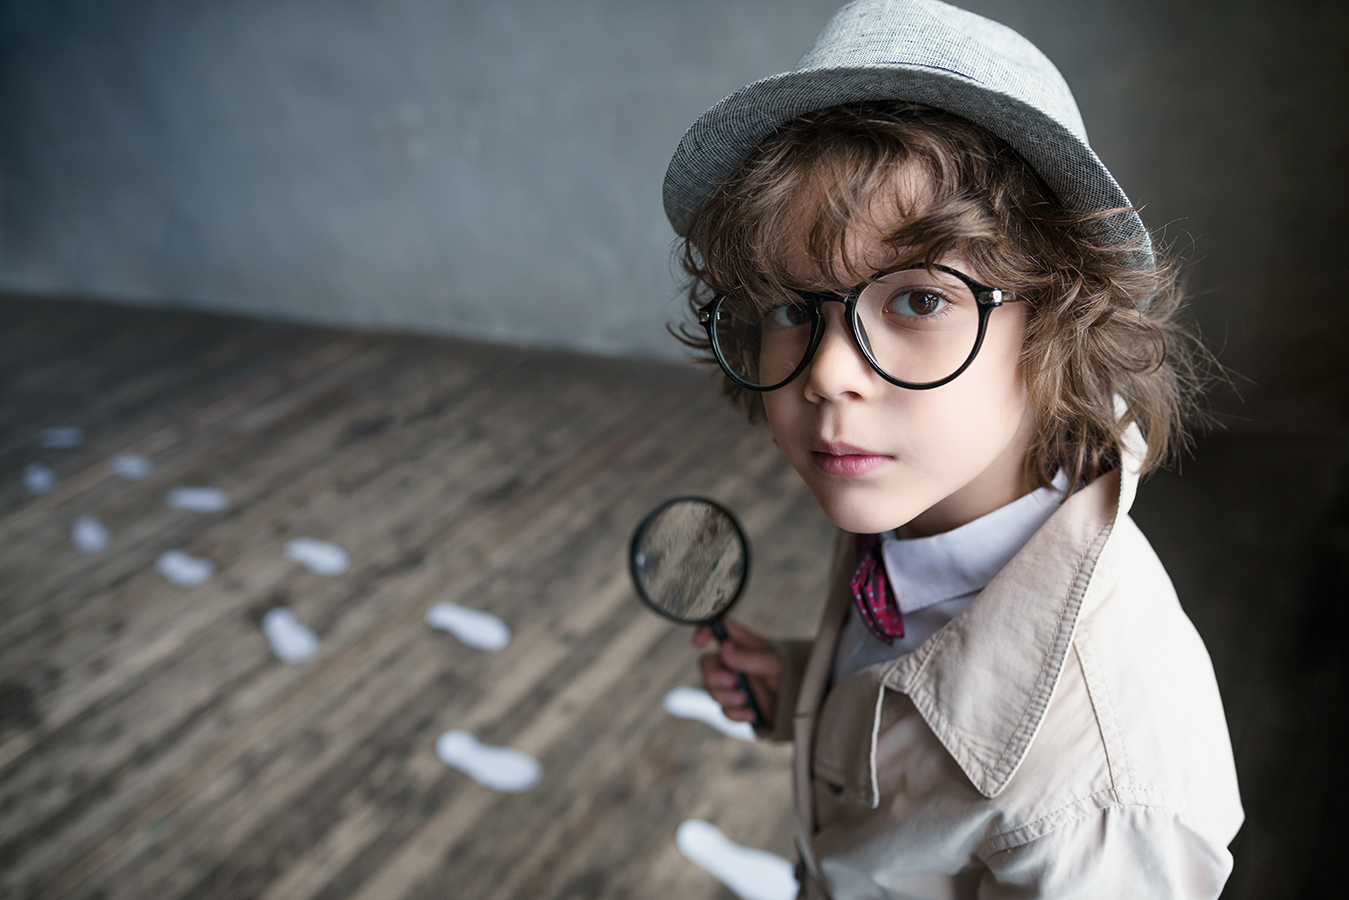 Books Or Movies detective search magnifying glass